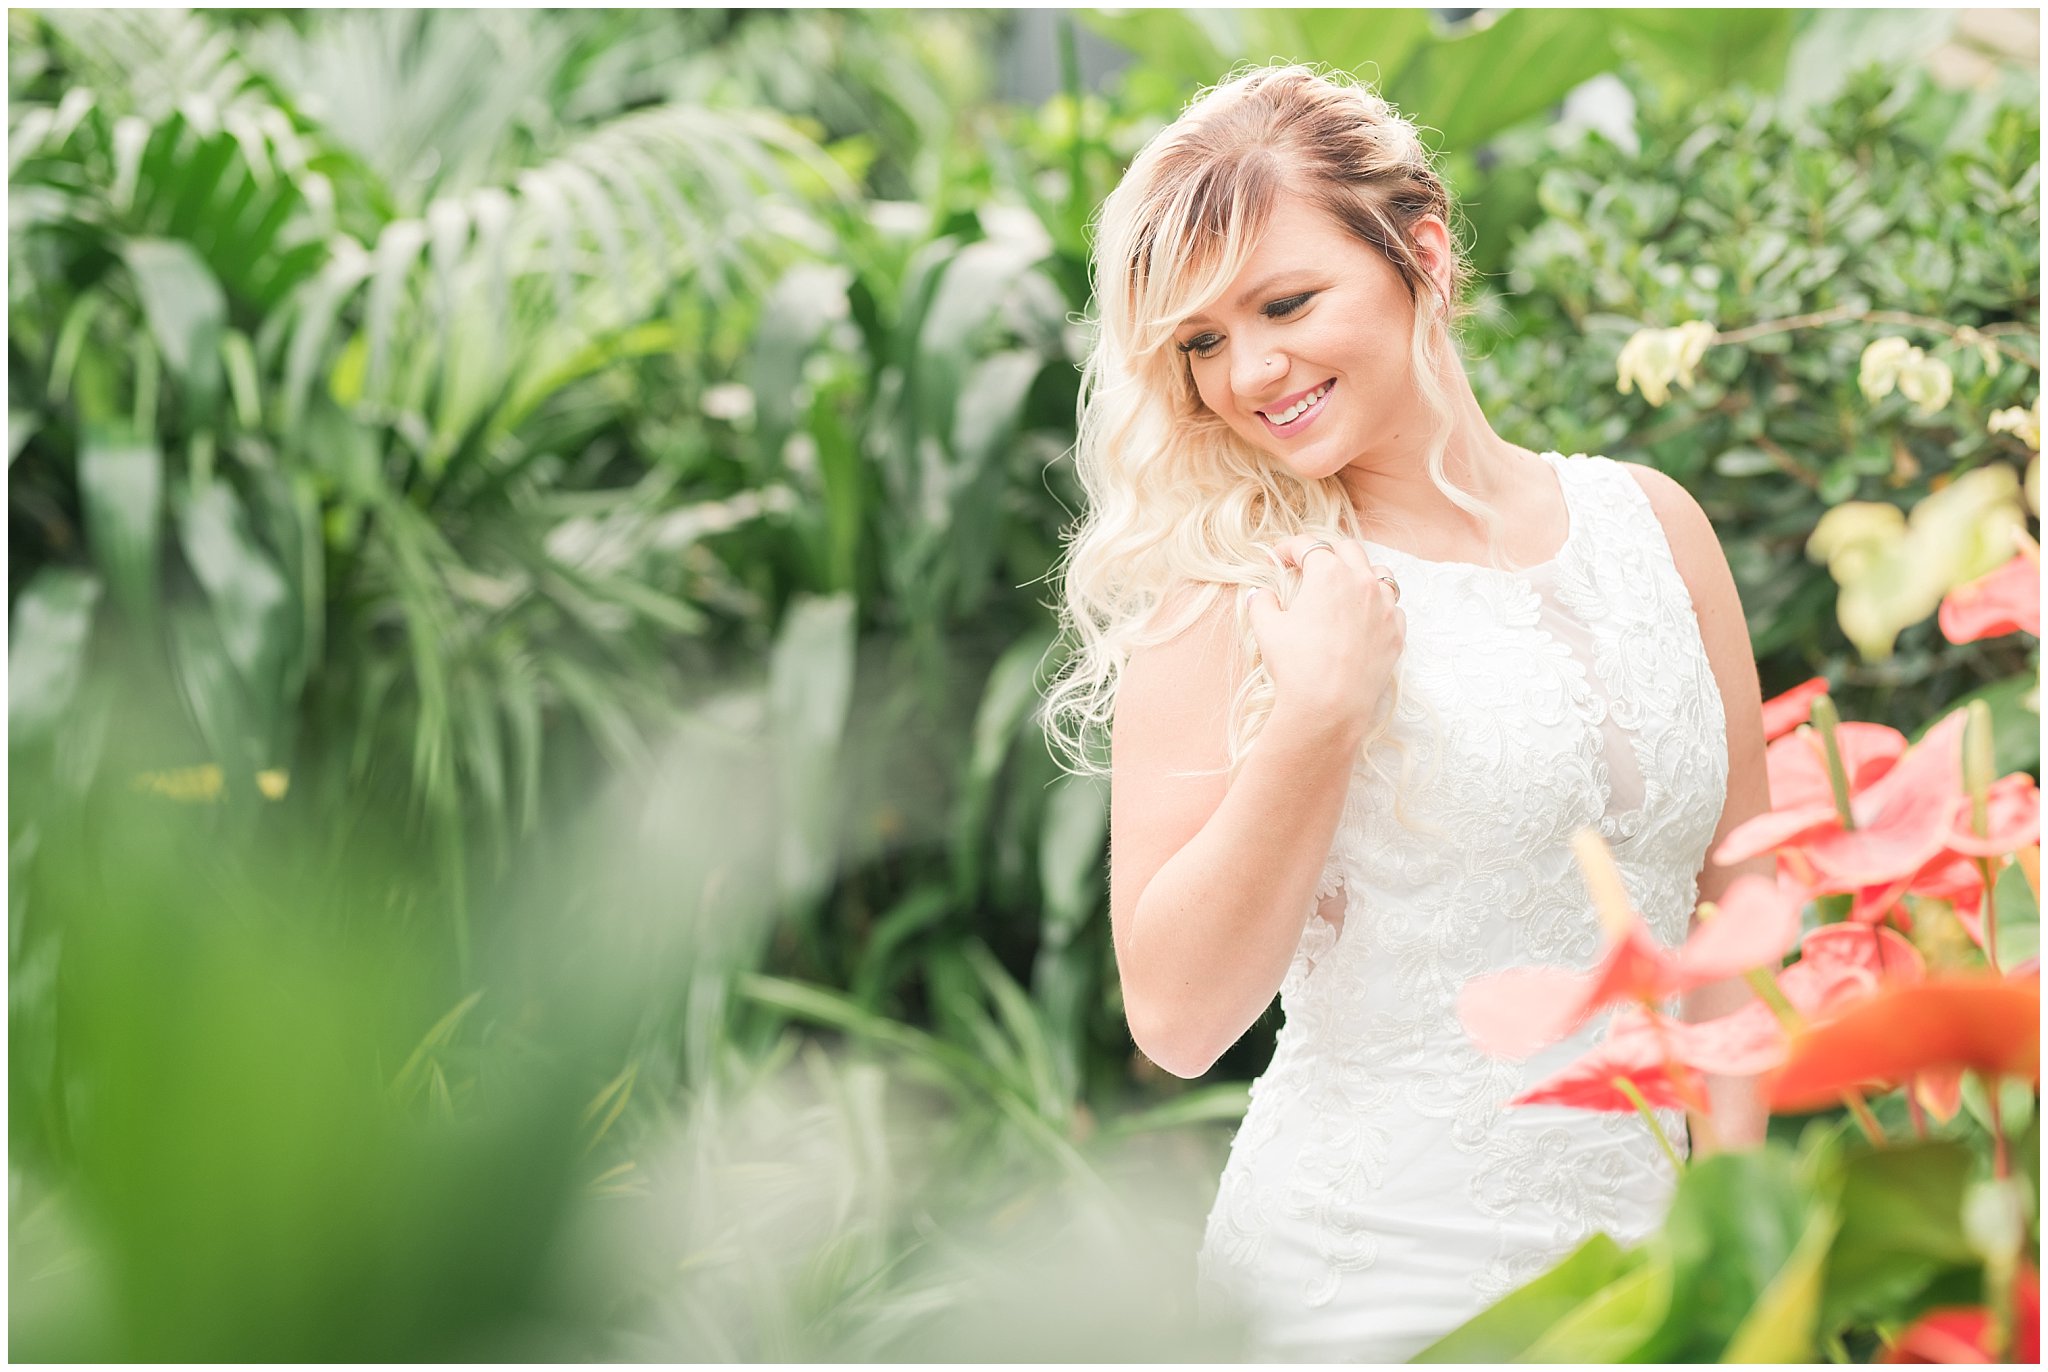 Bridal portraits in a greenhouse in Utah Cactus and Tropicals | Top Utah Wedding and Couples Photos 2019 | Jessie and Dallin Photography